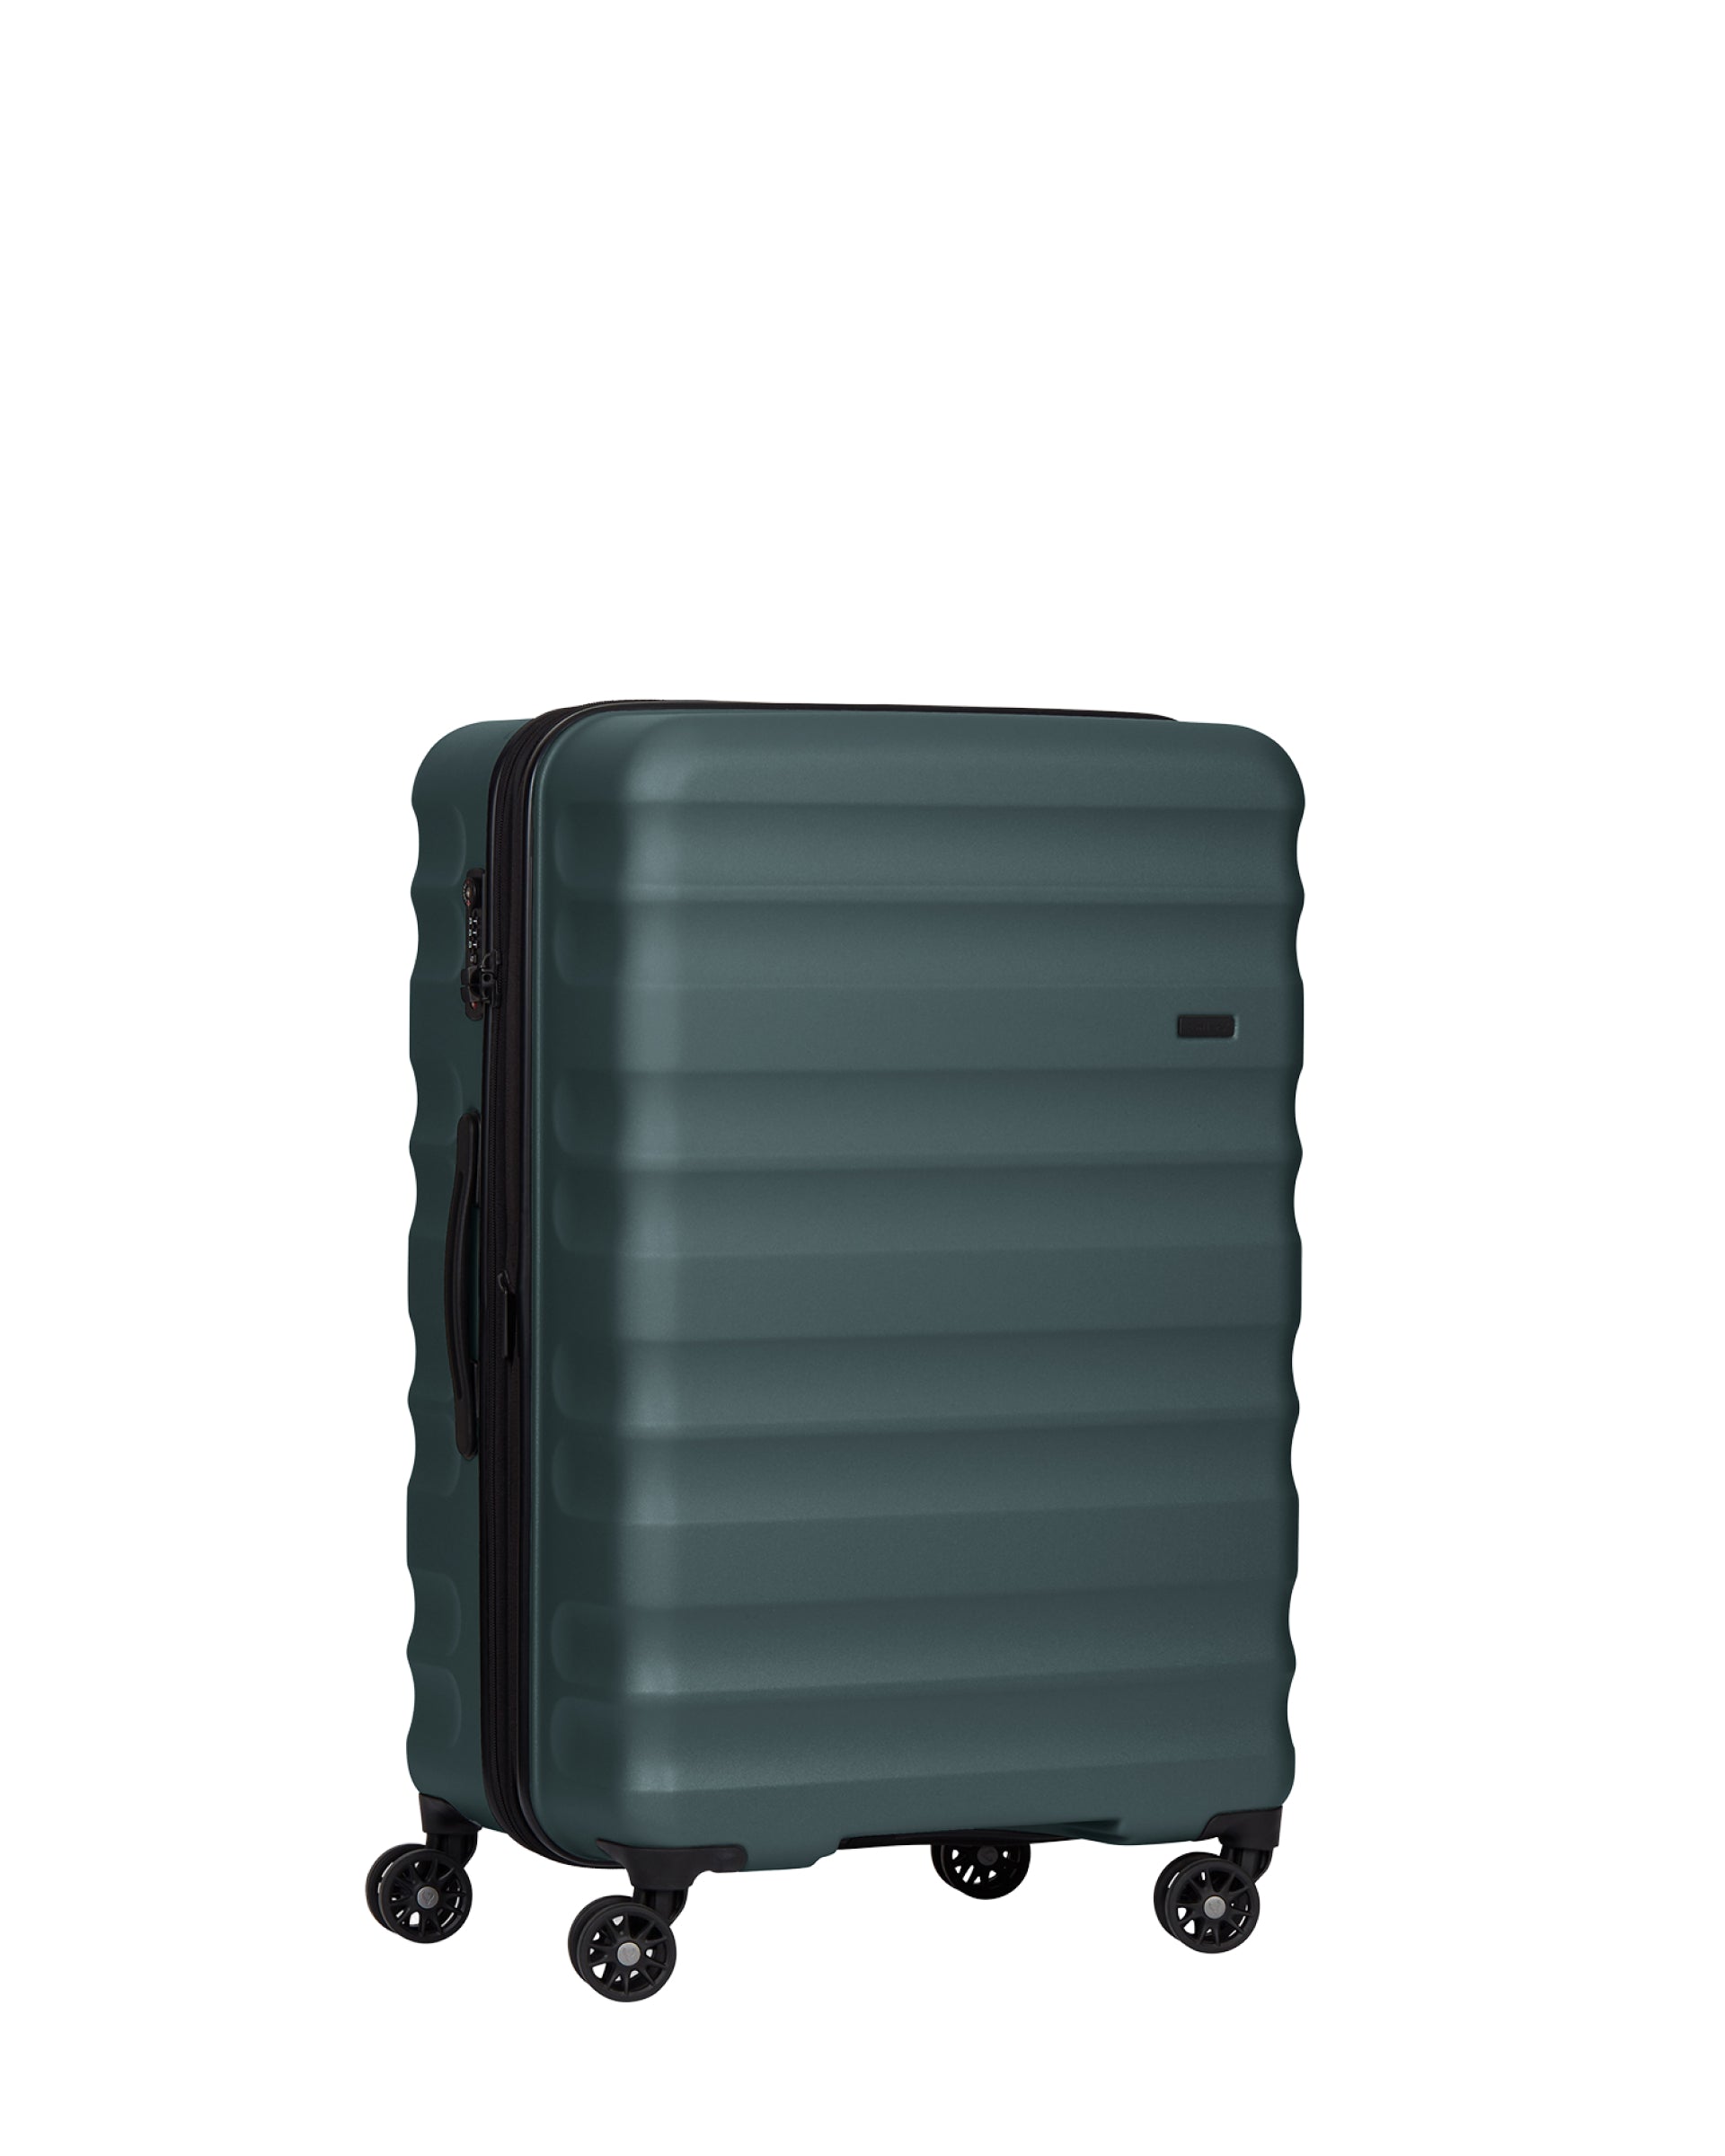 View Antler Clifton Large Suitcase In Sycamore Size 80cm x 51cm x 34cm information